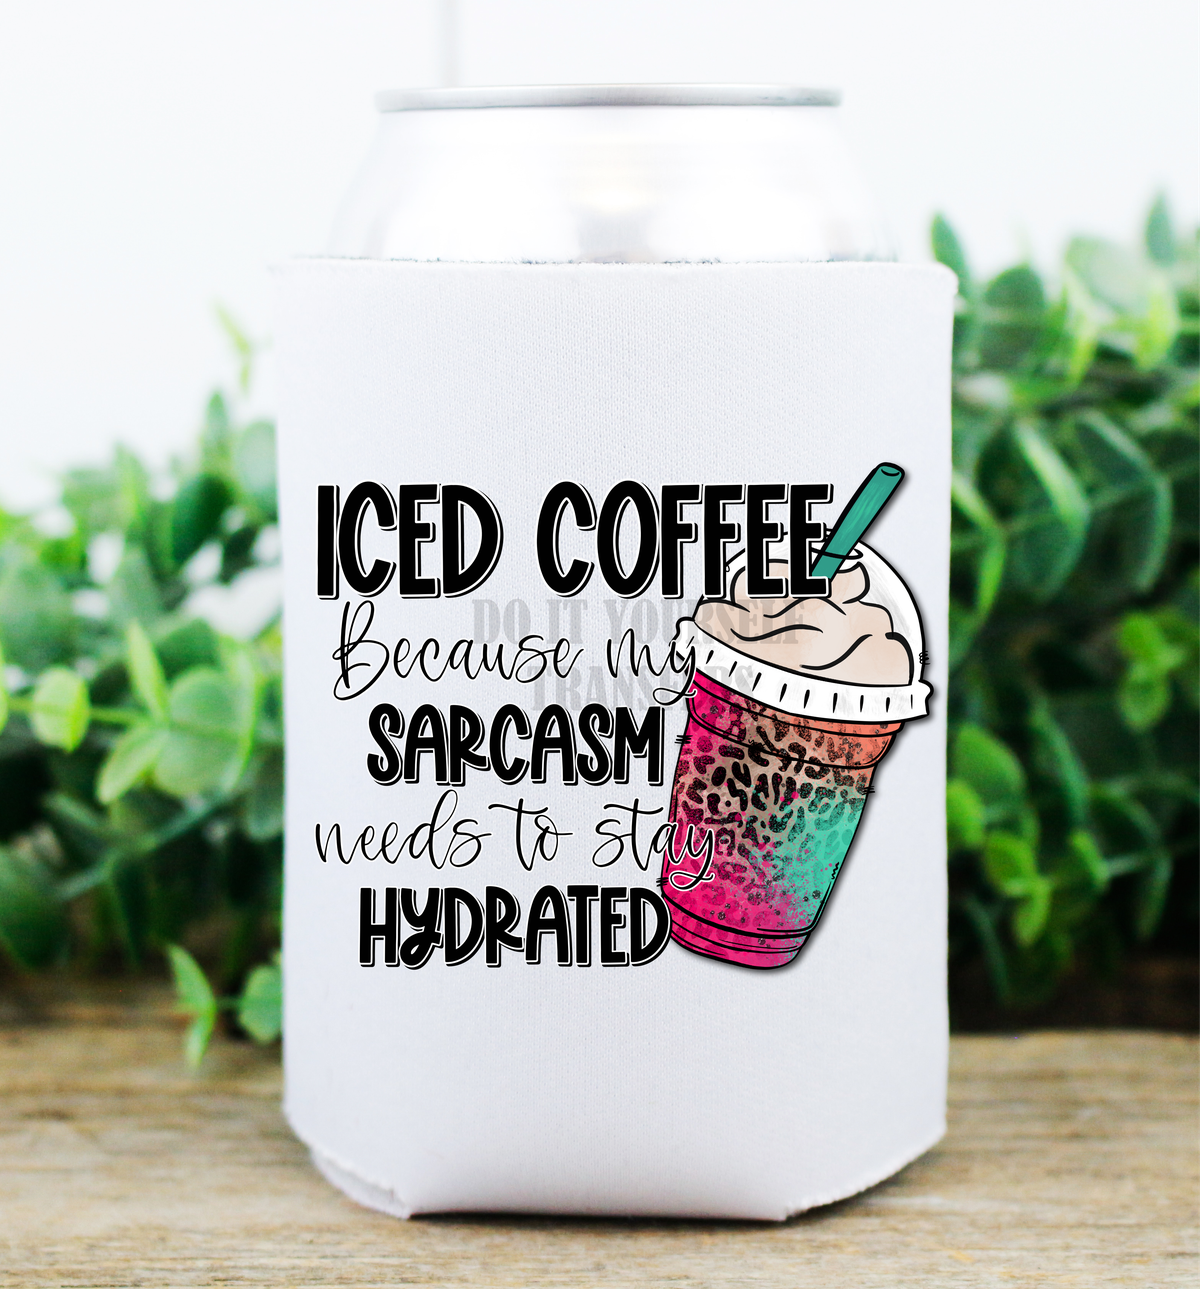 Iced coffee because my sarcasm needs to stay hydrated  / size  DTF TRANSFERPRINT TO ORDER